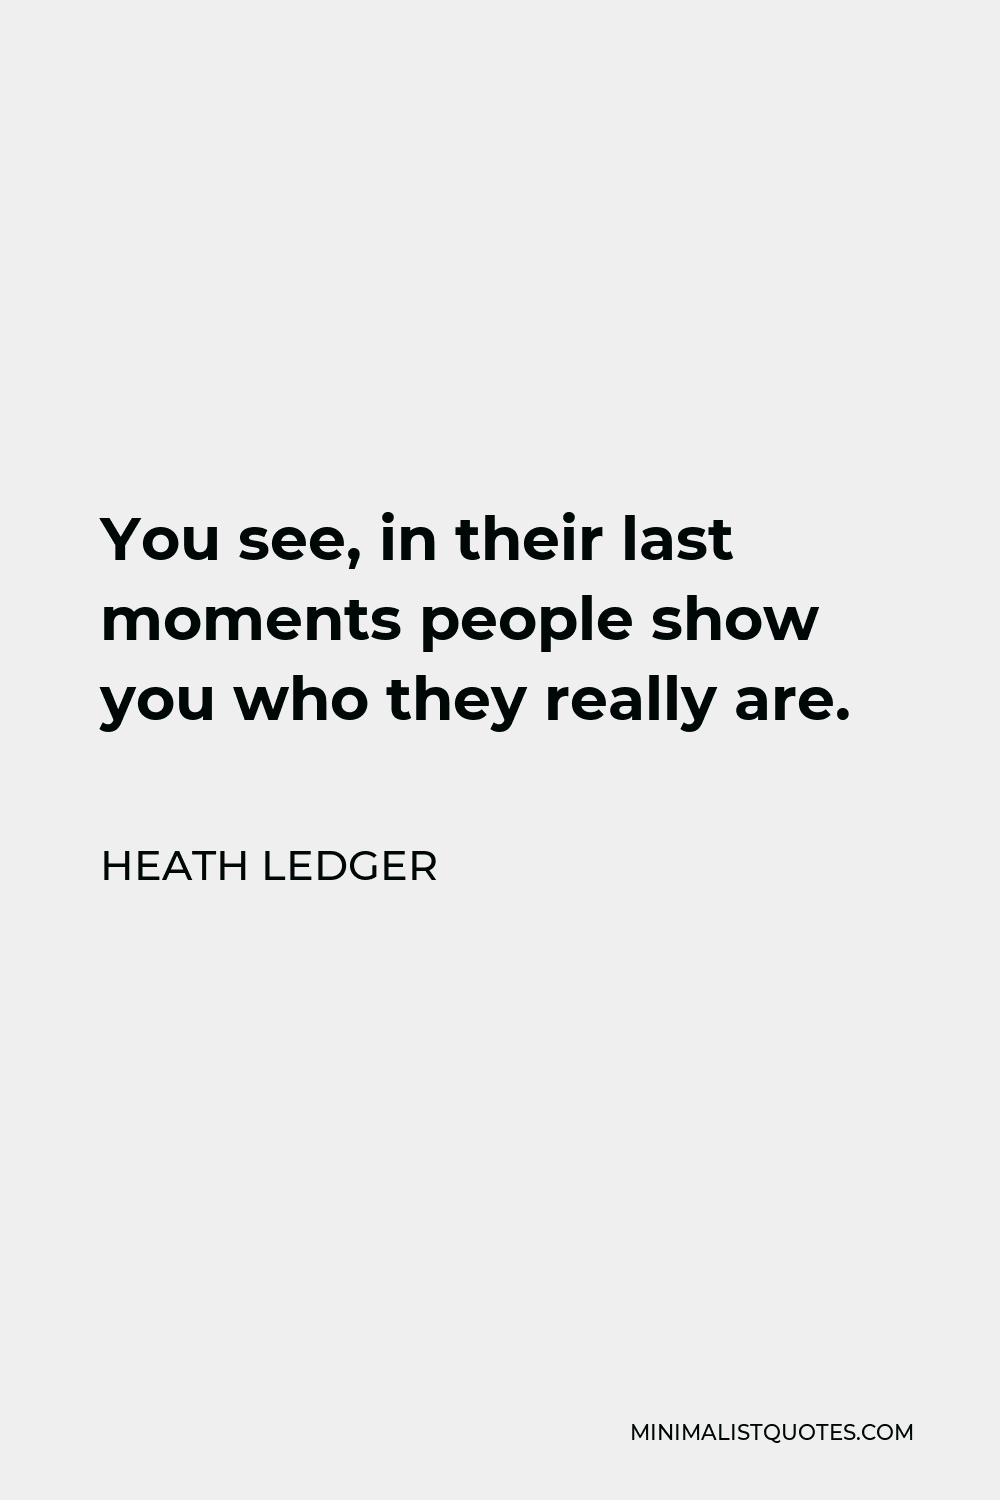 Heath Ledger Quote - You see, in their last moments people show you who they really are.